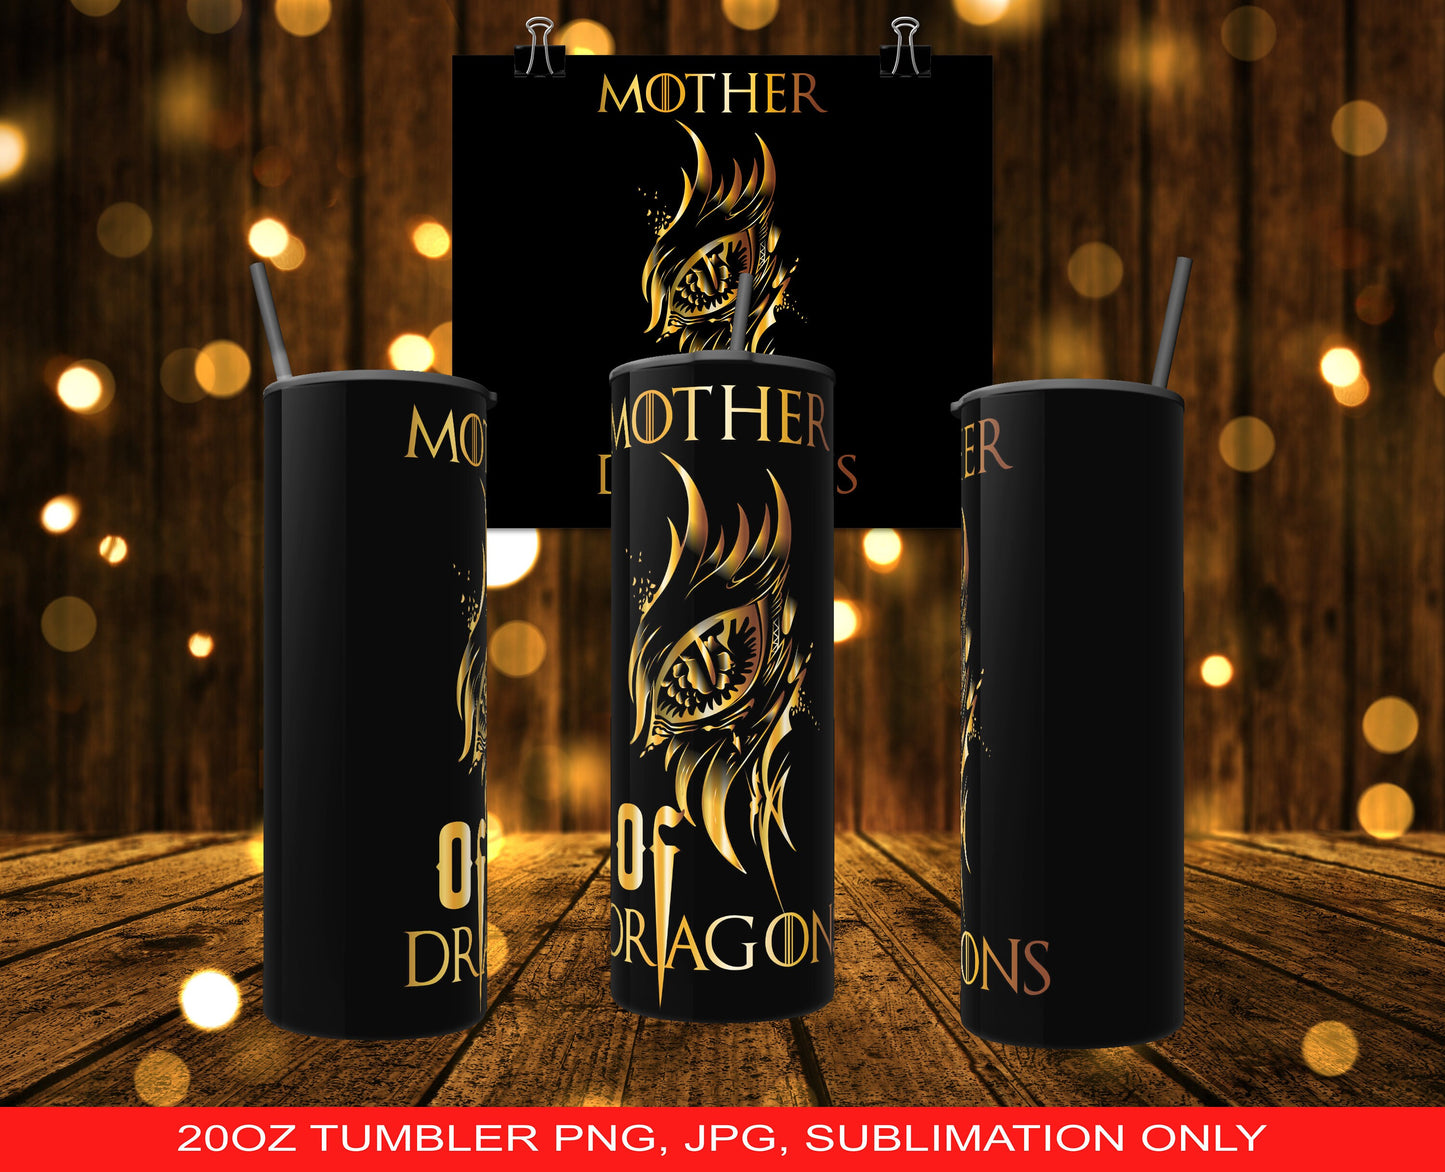 Mother of Dragons PNG and JPG ONLY - 20oz Tumbler Design - Gold/Black - Sublimation, Waterslide Printing, Frameable